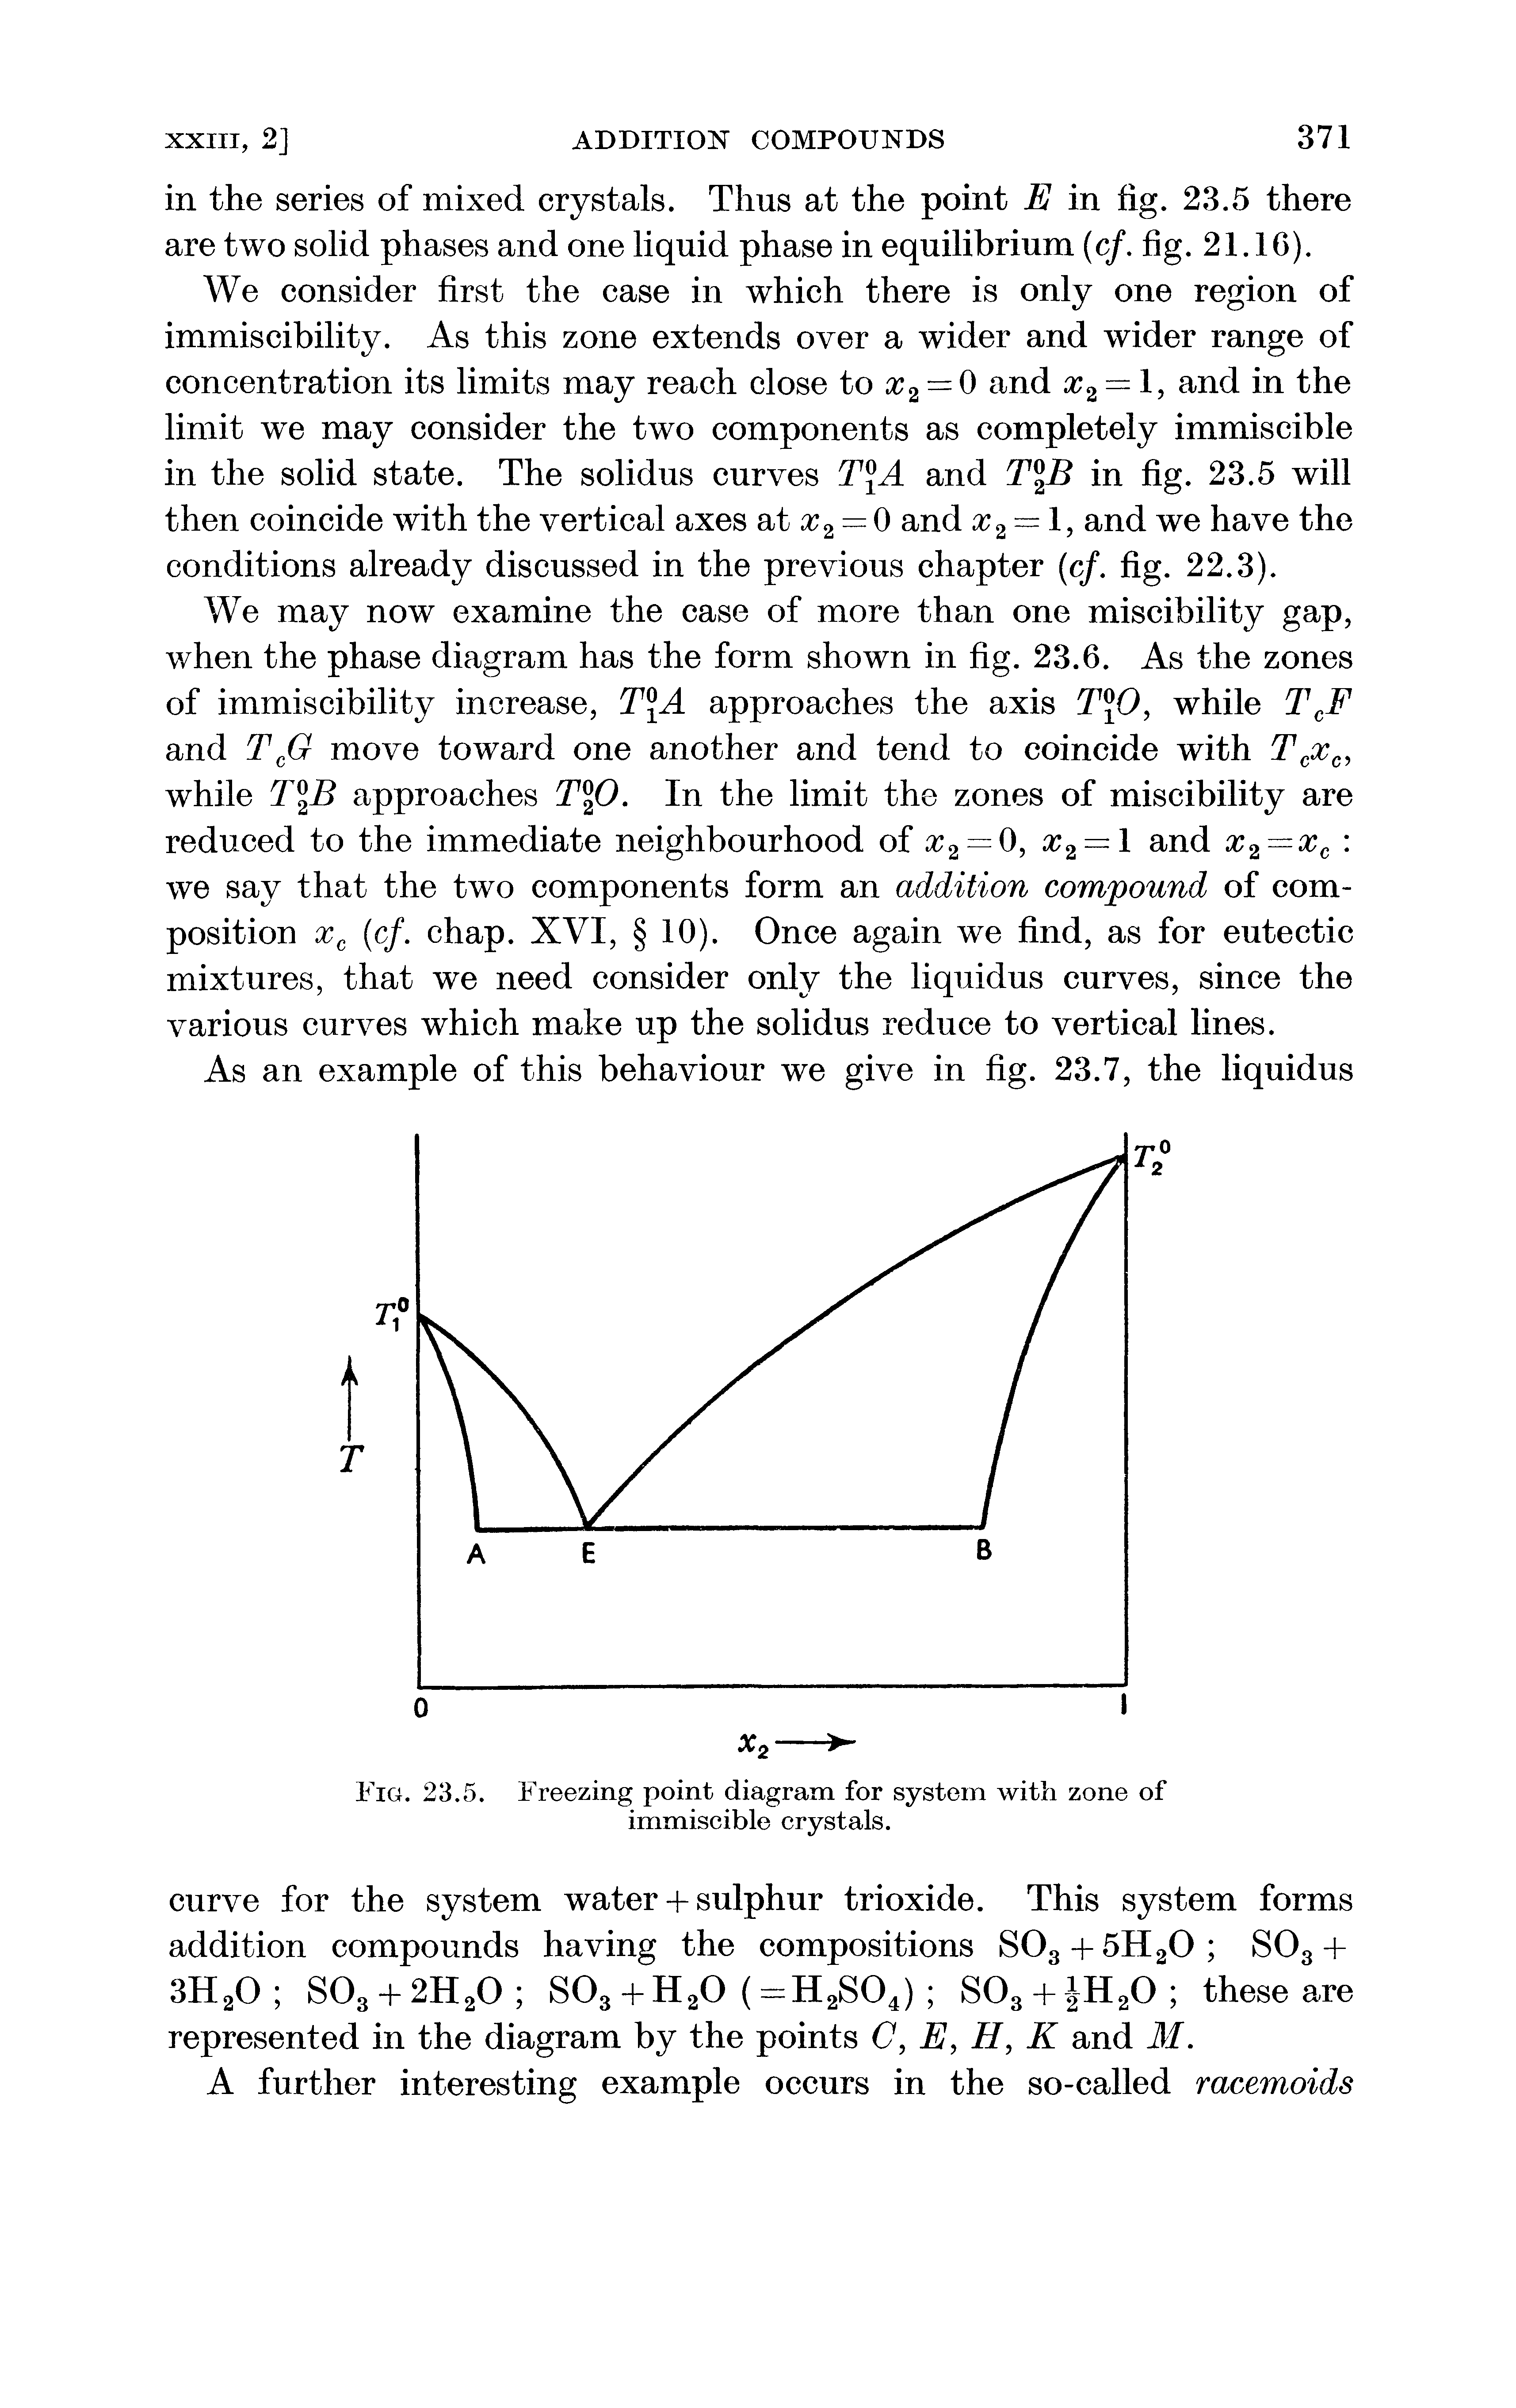 Fig. 23.5. Freezing point diagram for system with zone of immiscible crystals.